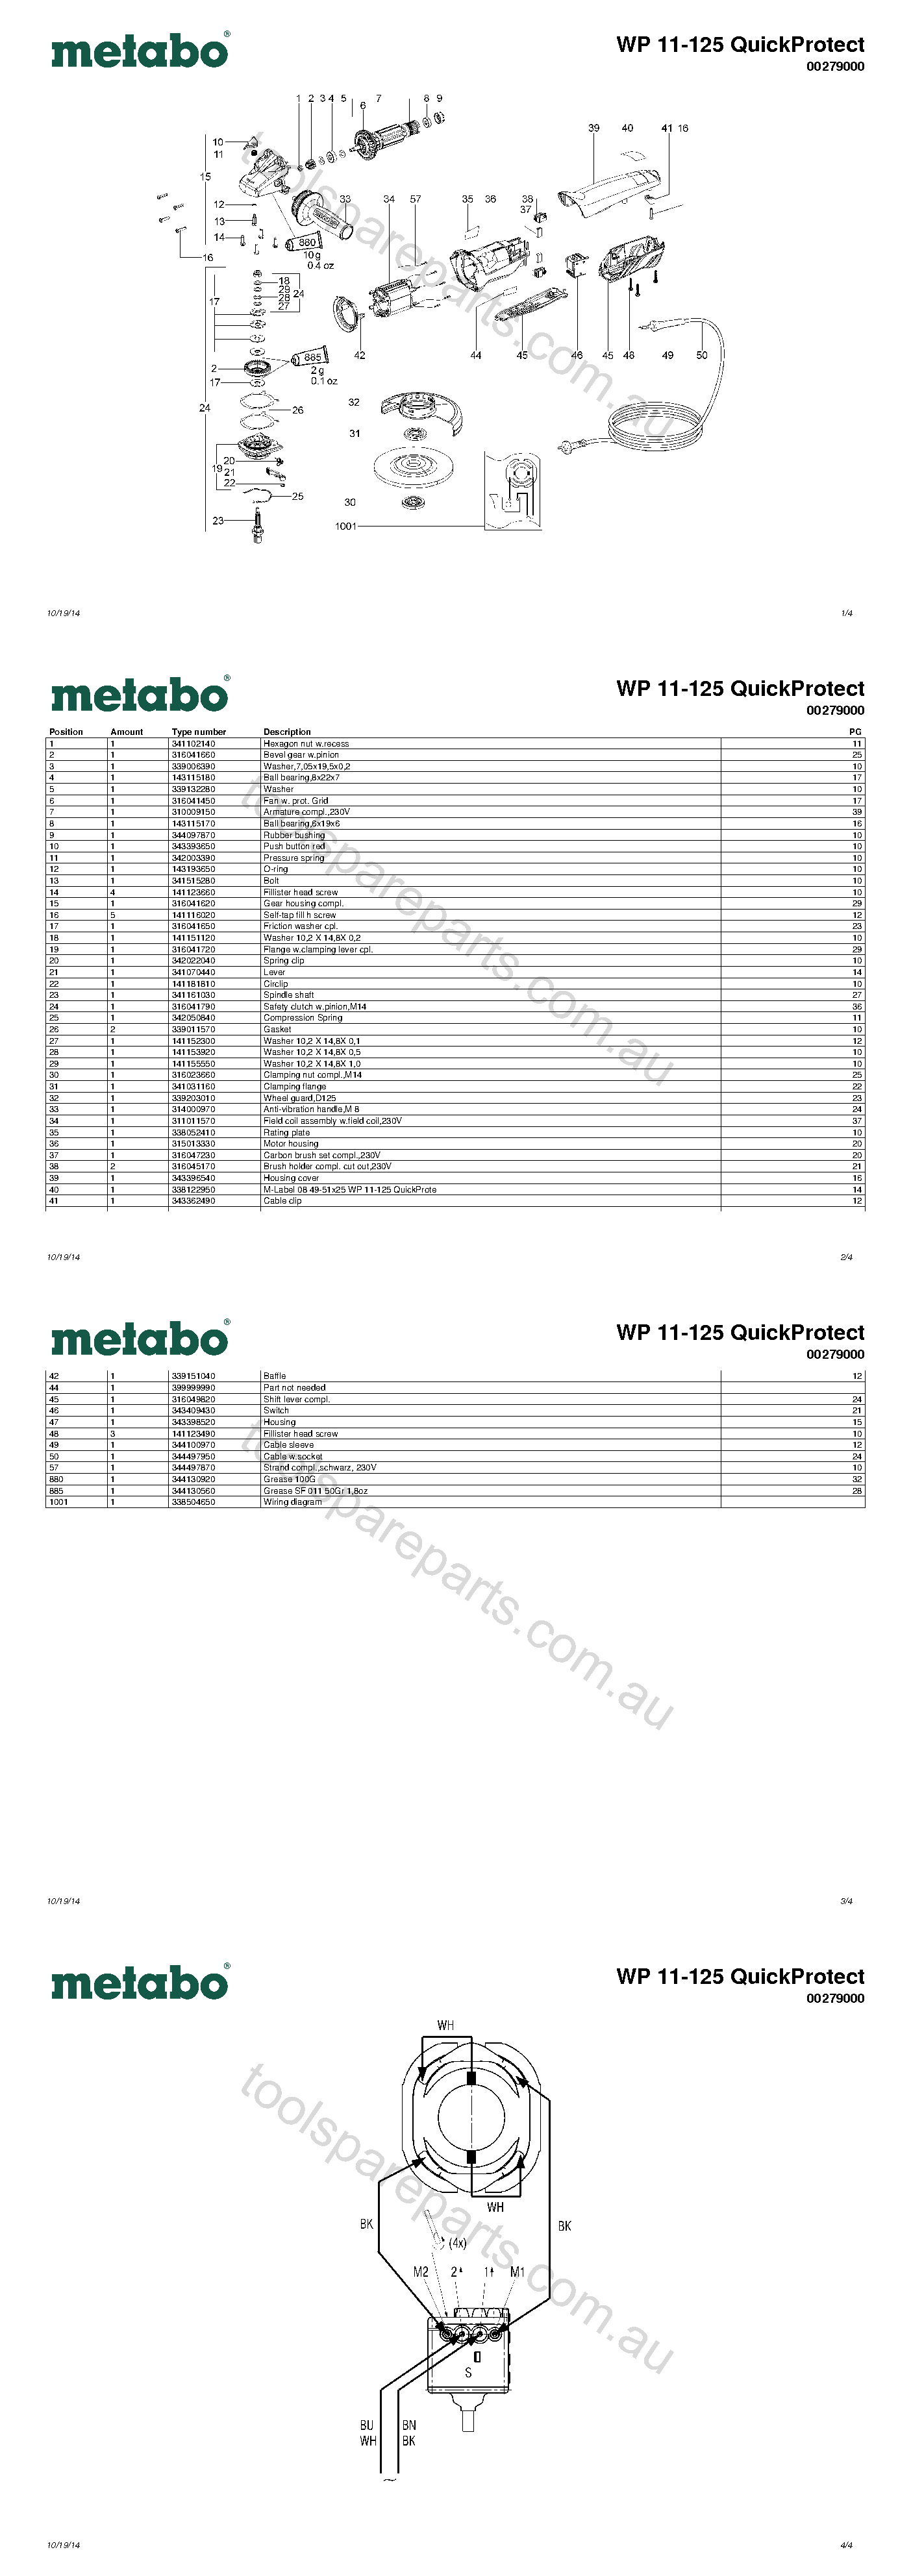 Metabo WP 11-125 QuickProtect 00279000  Diagram 1